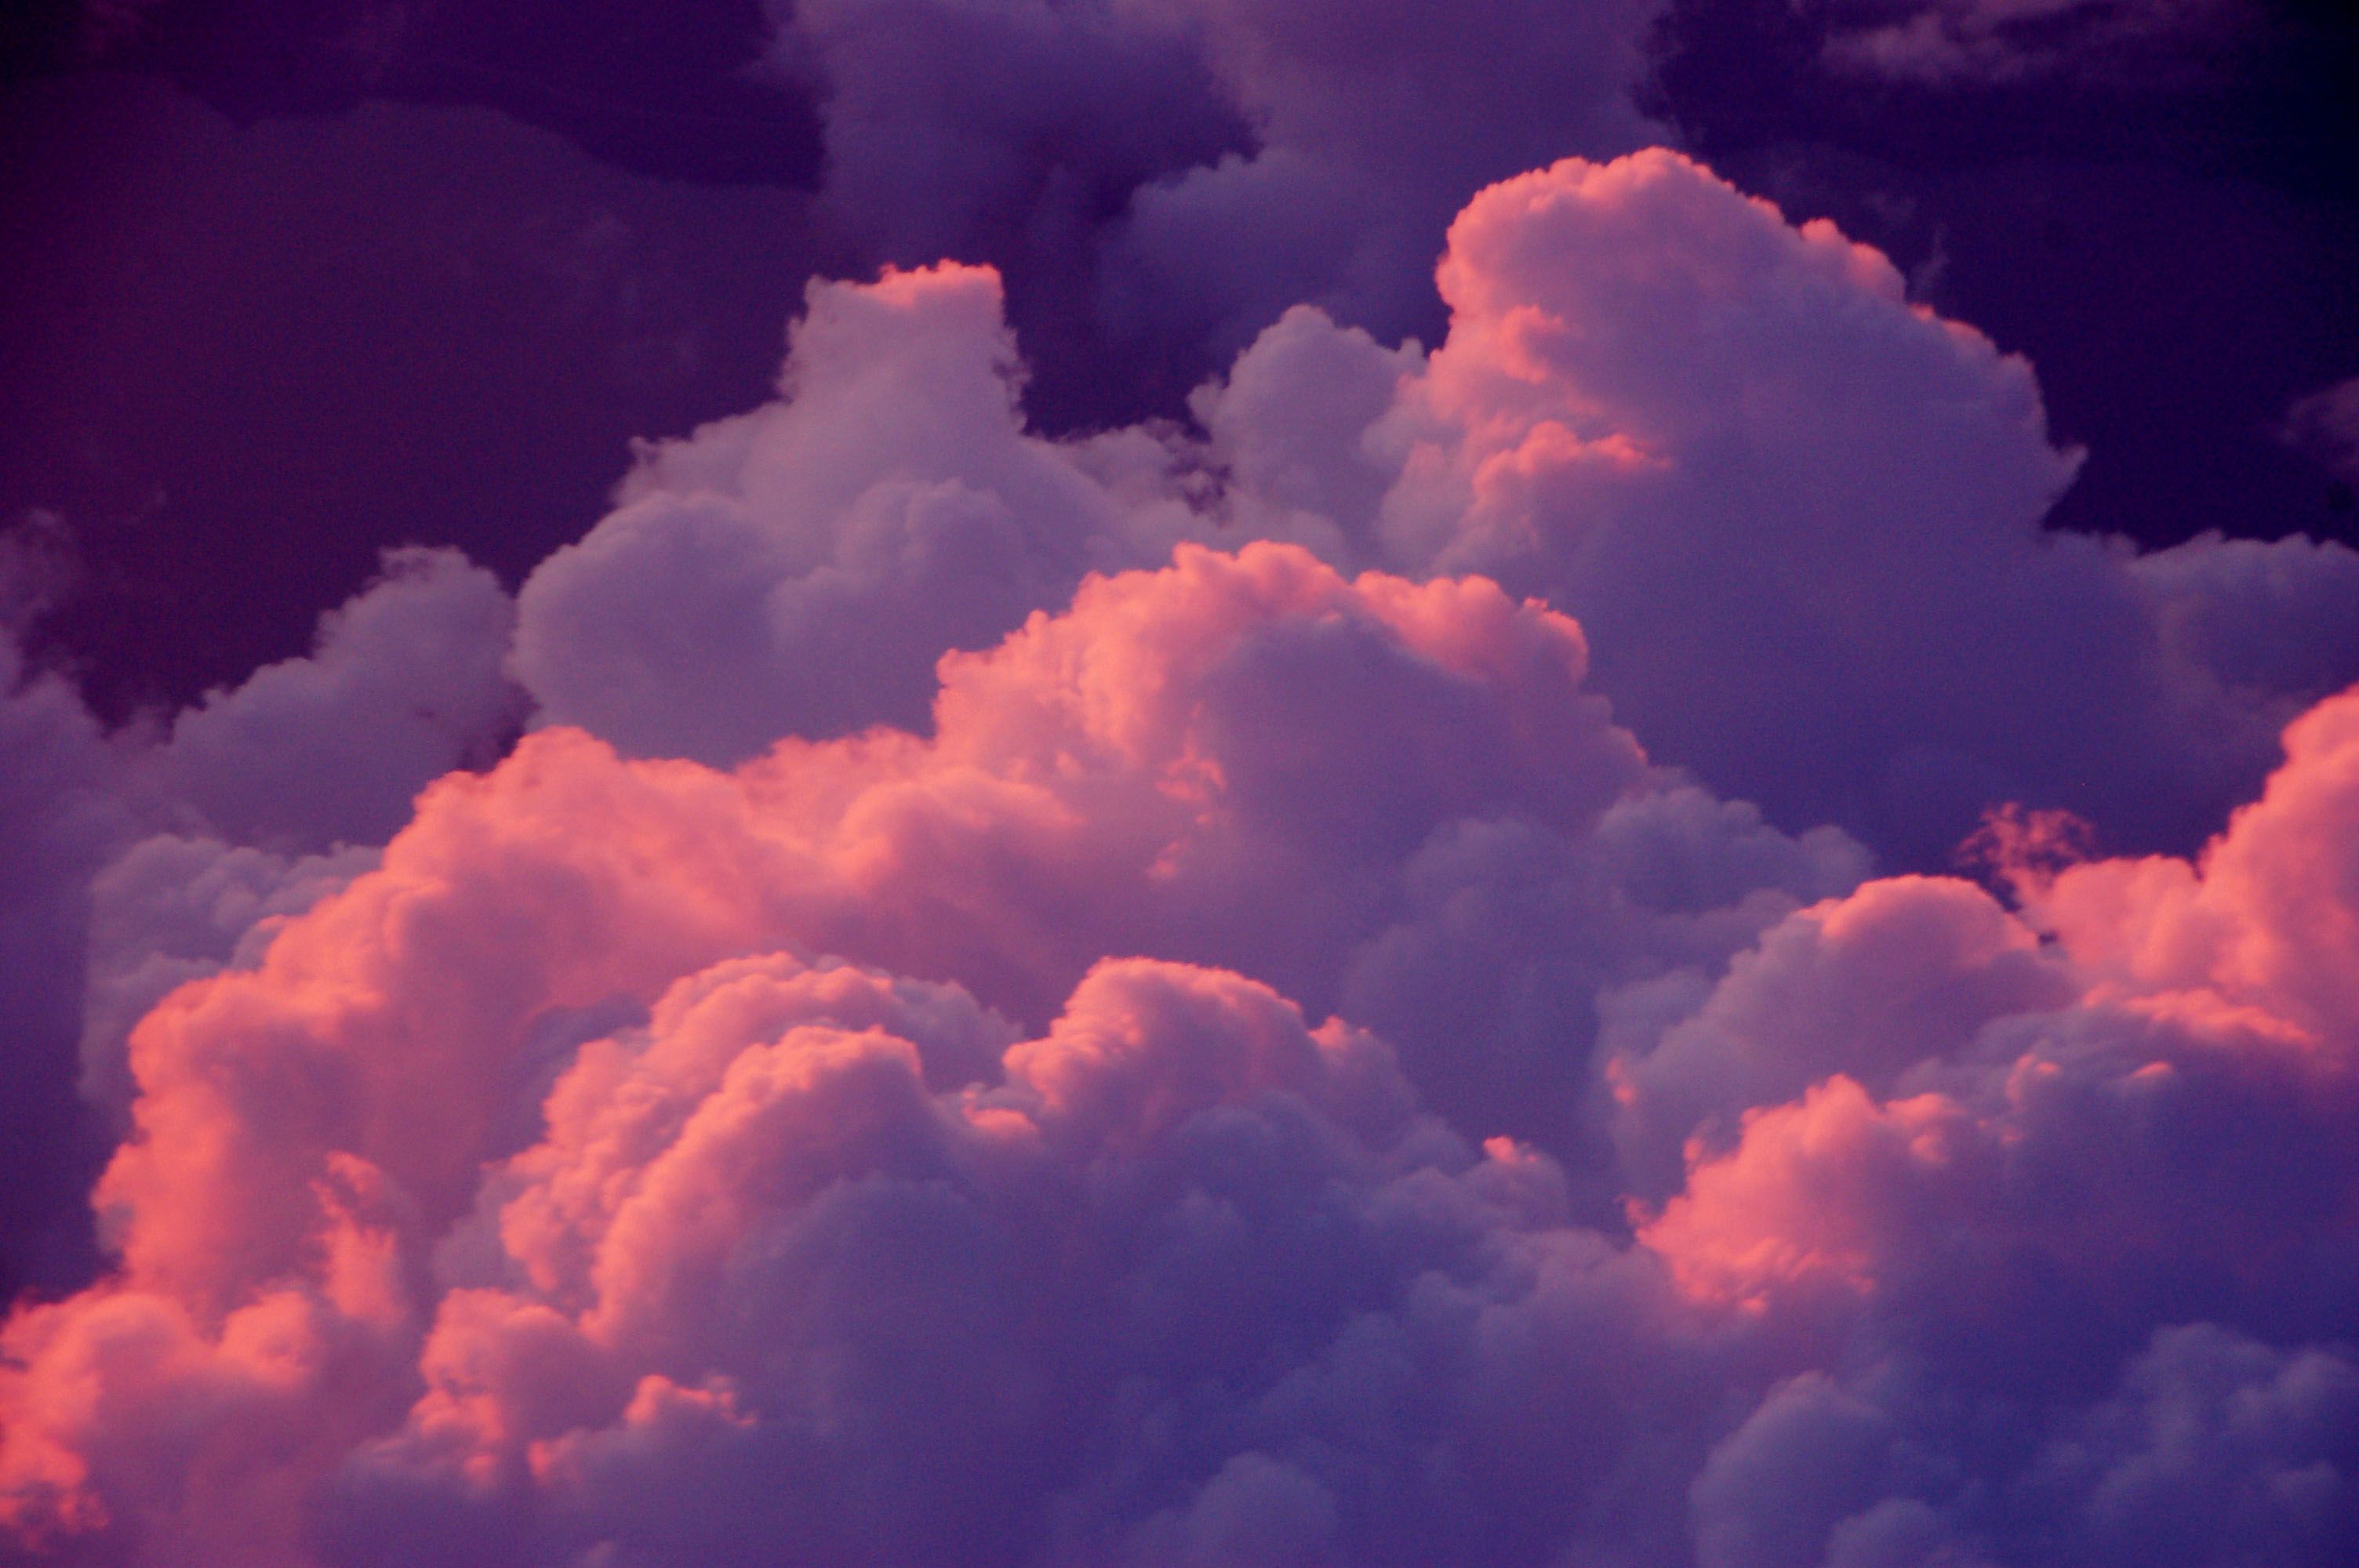 Clouds Aesthetic Wallpaper Free Clouds Aesthetic